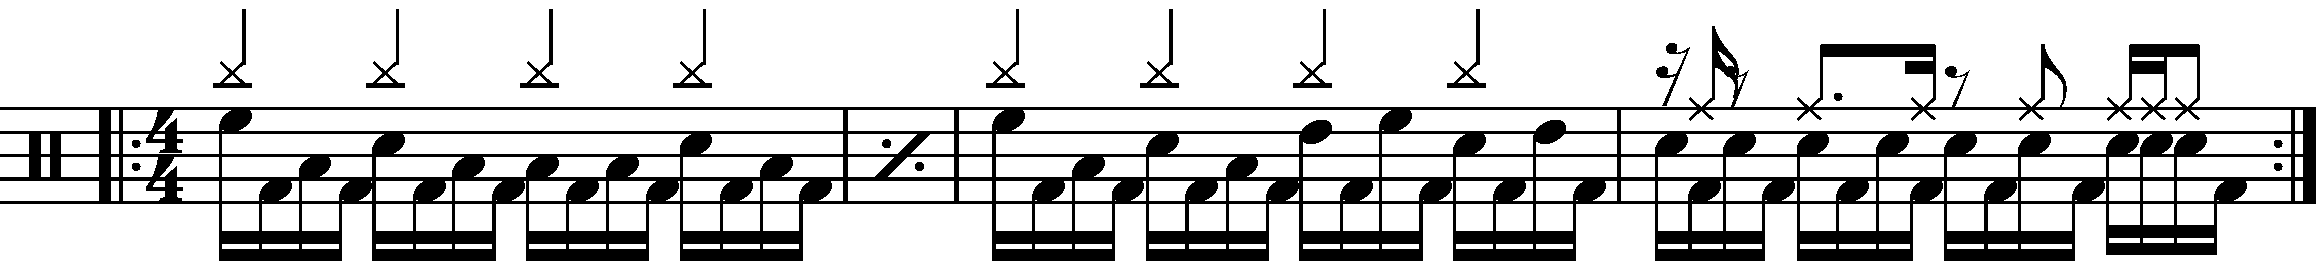 A four bar phrase based on the fake double kick groove concept